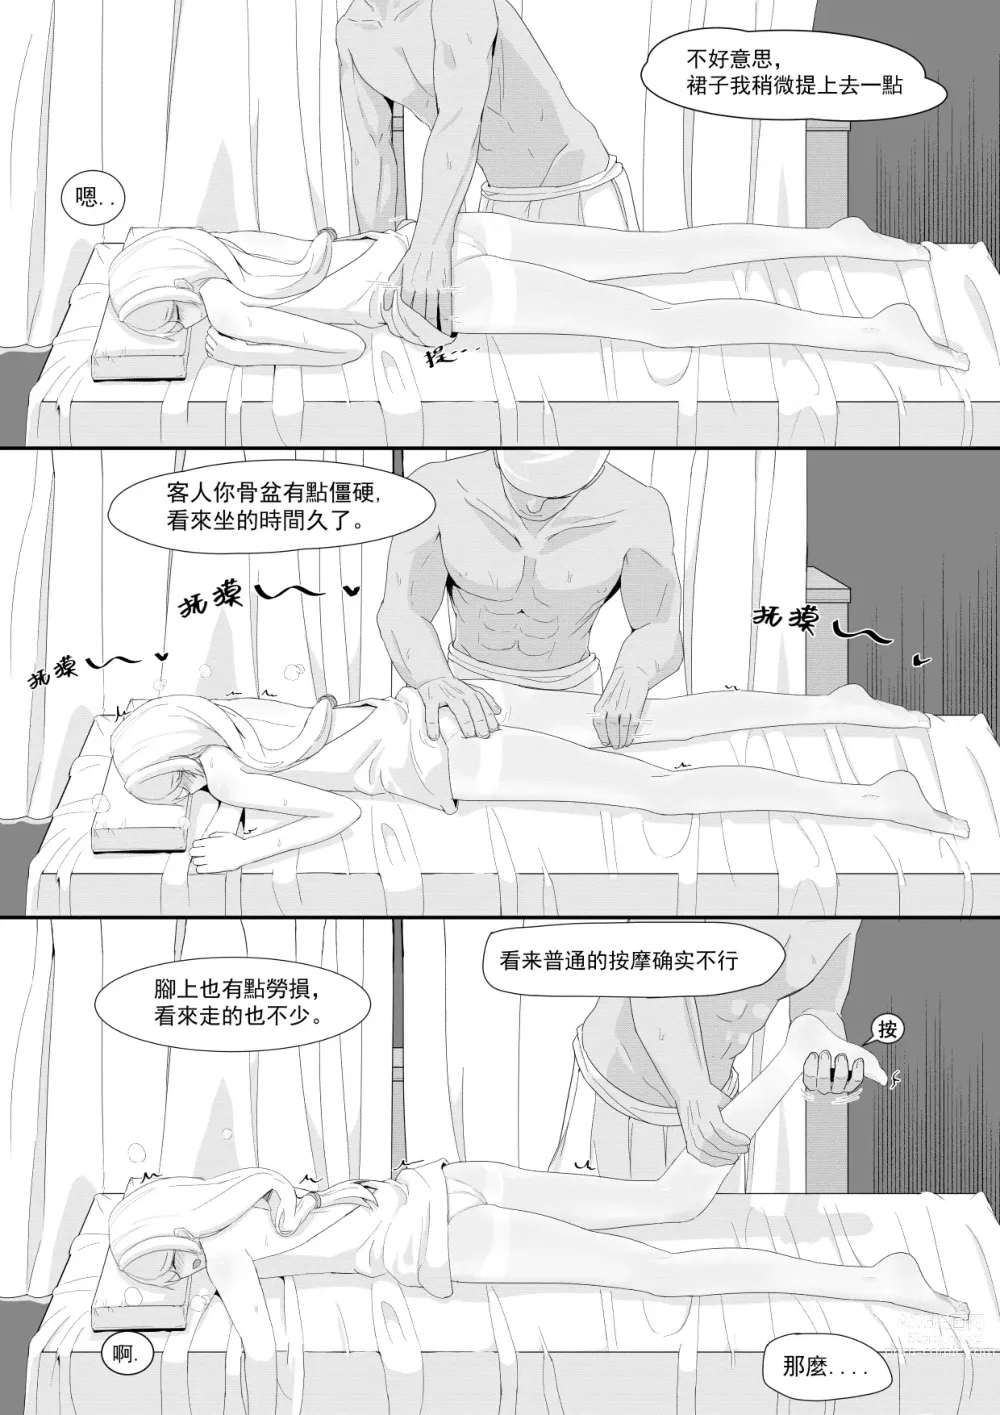 Page 10 of doujinshi Private Visit Time Part 2